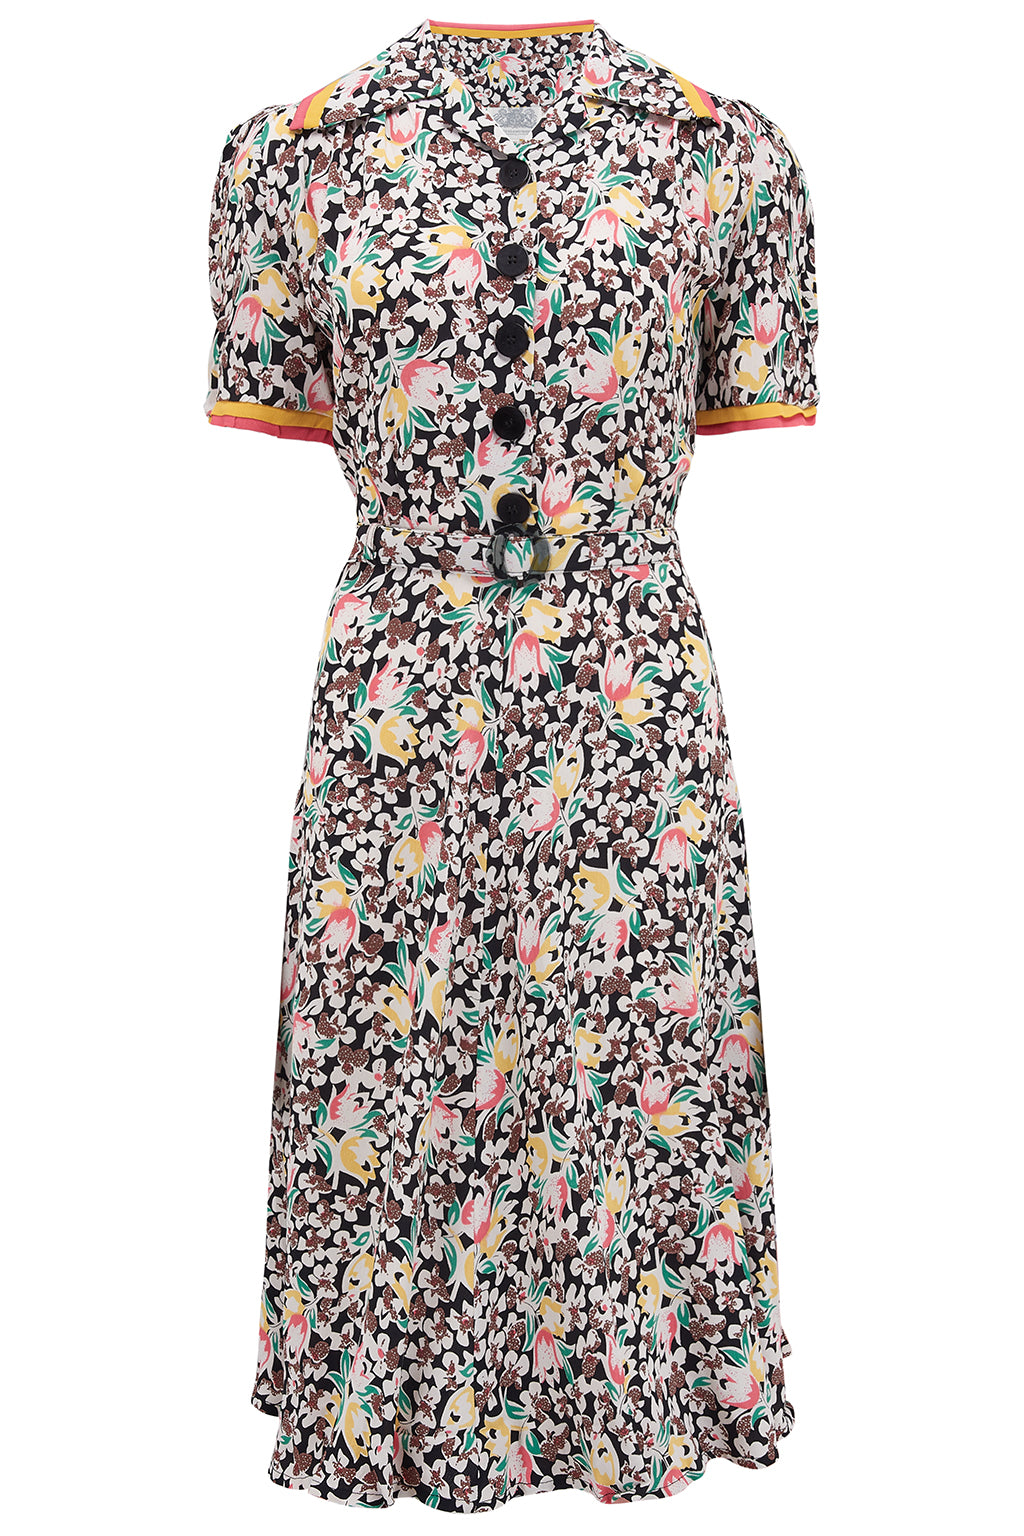 "Roma" Dress in Tulip Print, Authentic & Classic 1940's Vintage Inspired Style - True and authentic vintage style clothing, inspired by the Classic styles of CC41 , WW2 and the fun 1950s RocknRoll era, for everyday wear plus events like Goodwood Revival, Twinwood Festival and Viva Las Vegas Rockabilly Weekend Rock n Romance The Seamstress Of Bloomsbury